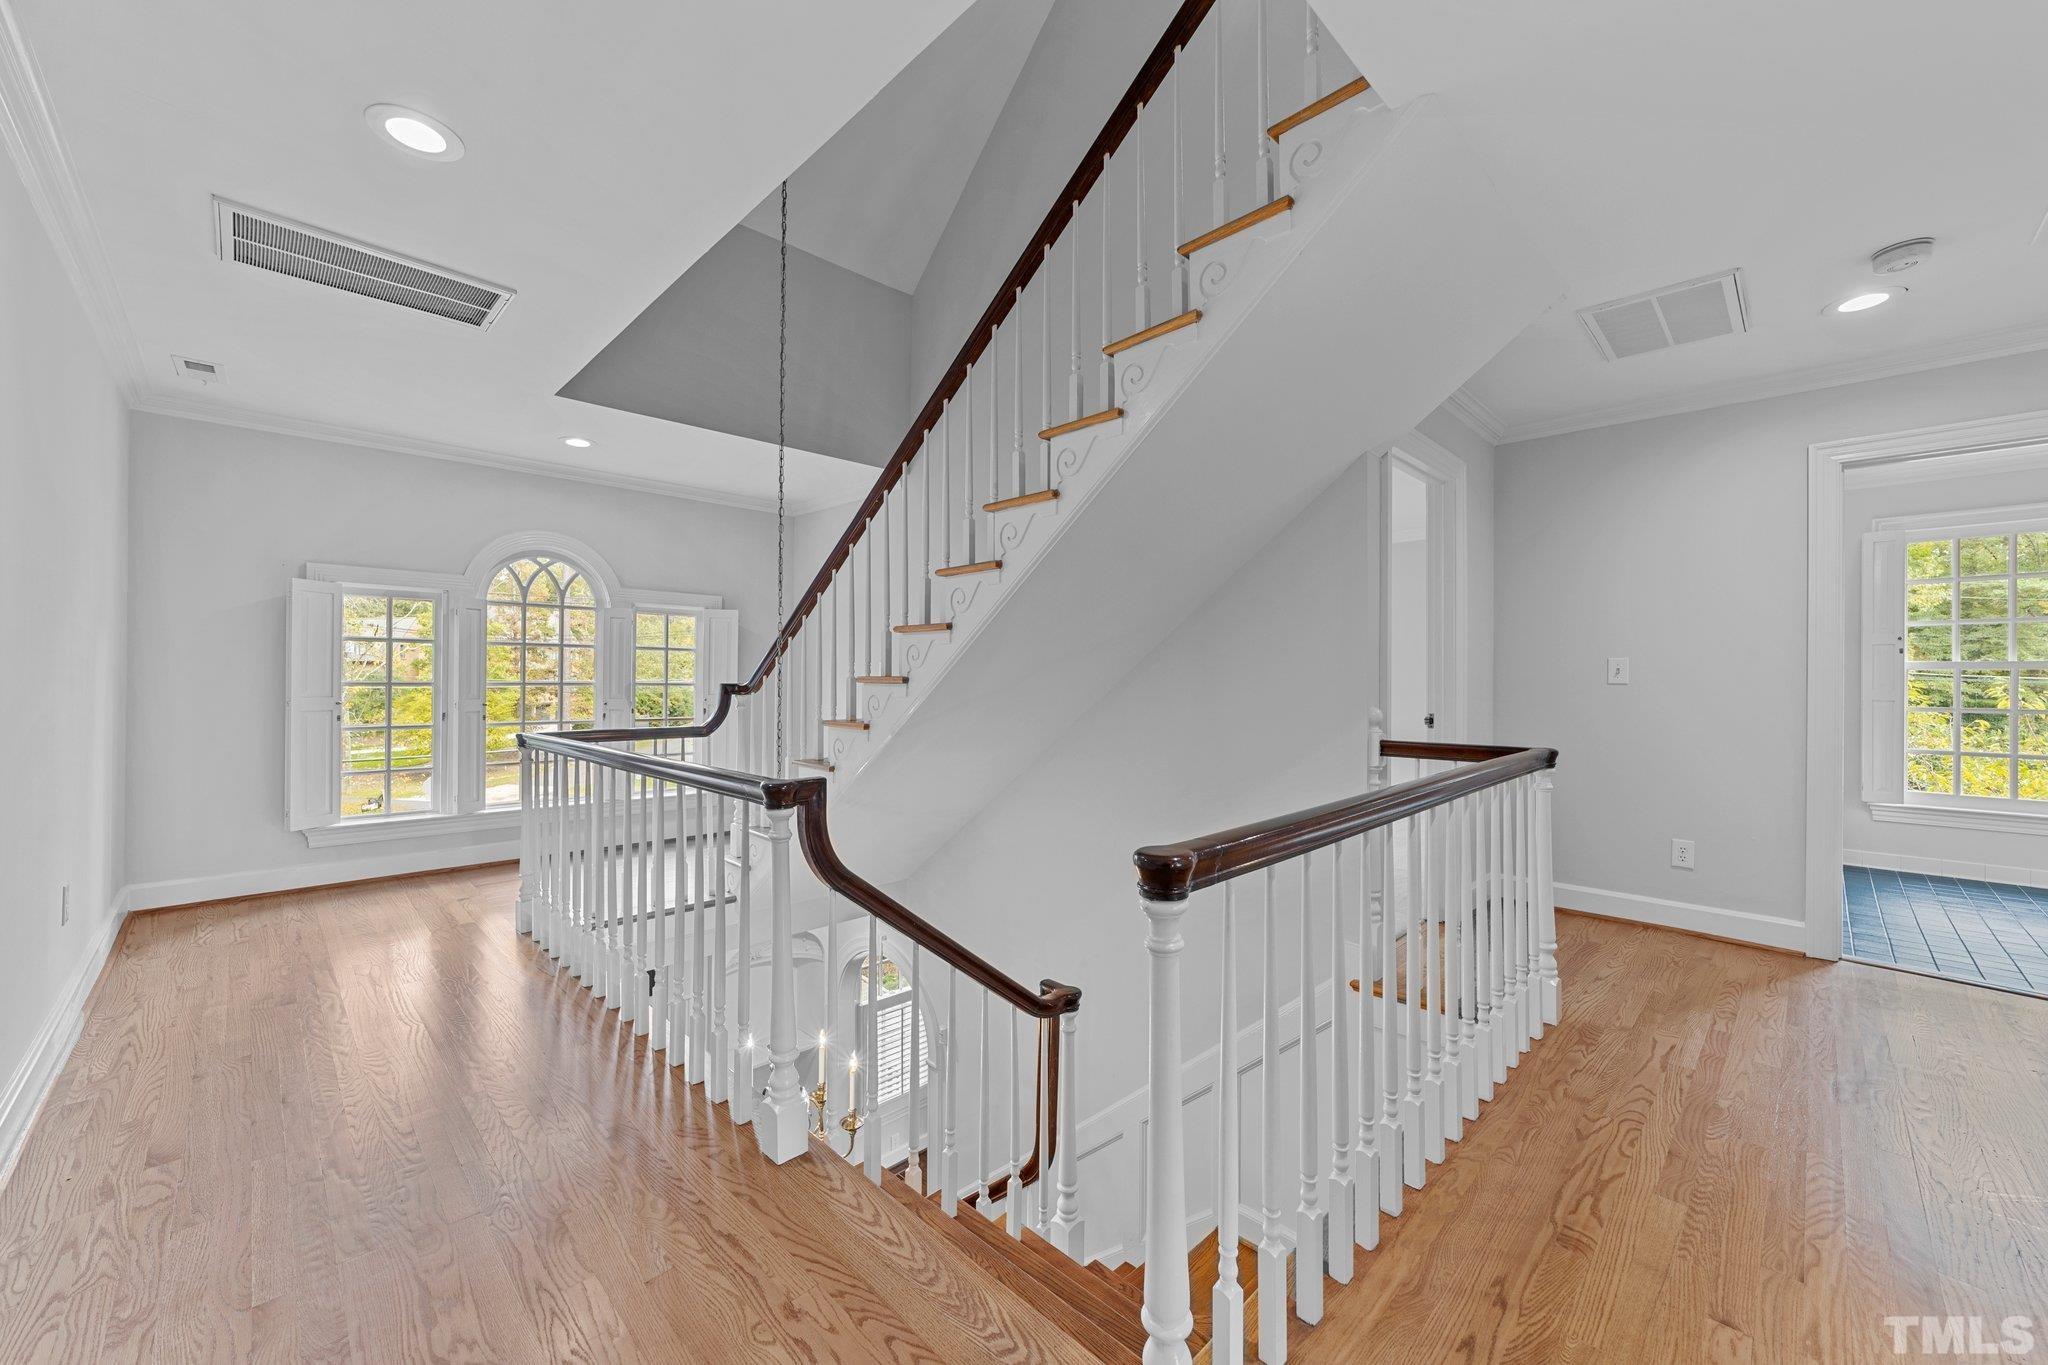 Fabulous interior stairs open to second floor bedrooms and baths and continue to 3rd floor to walk in attic plus flex space. A bonus for crafts, sewing or other quiet activity.